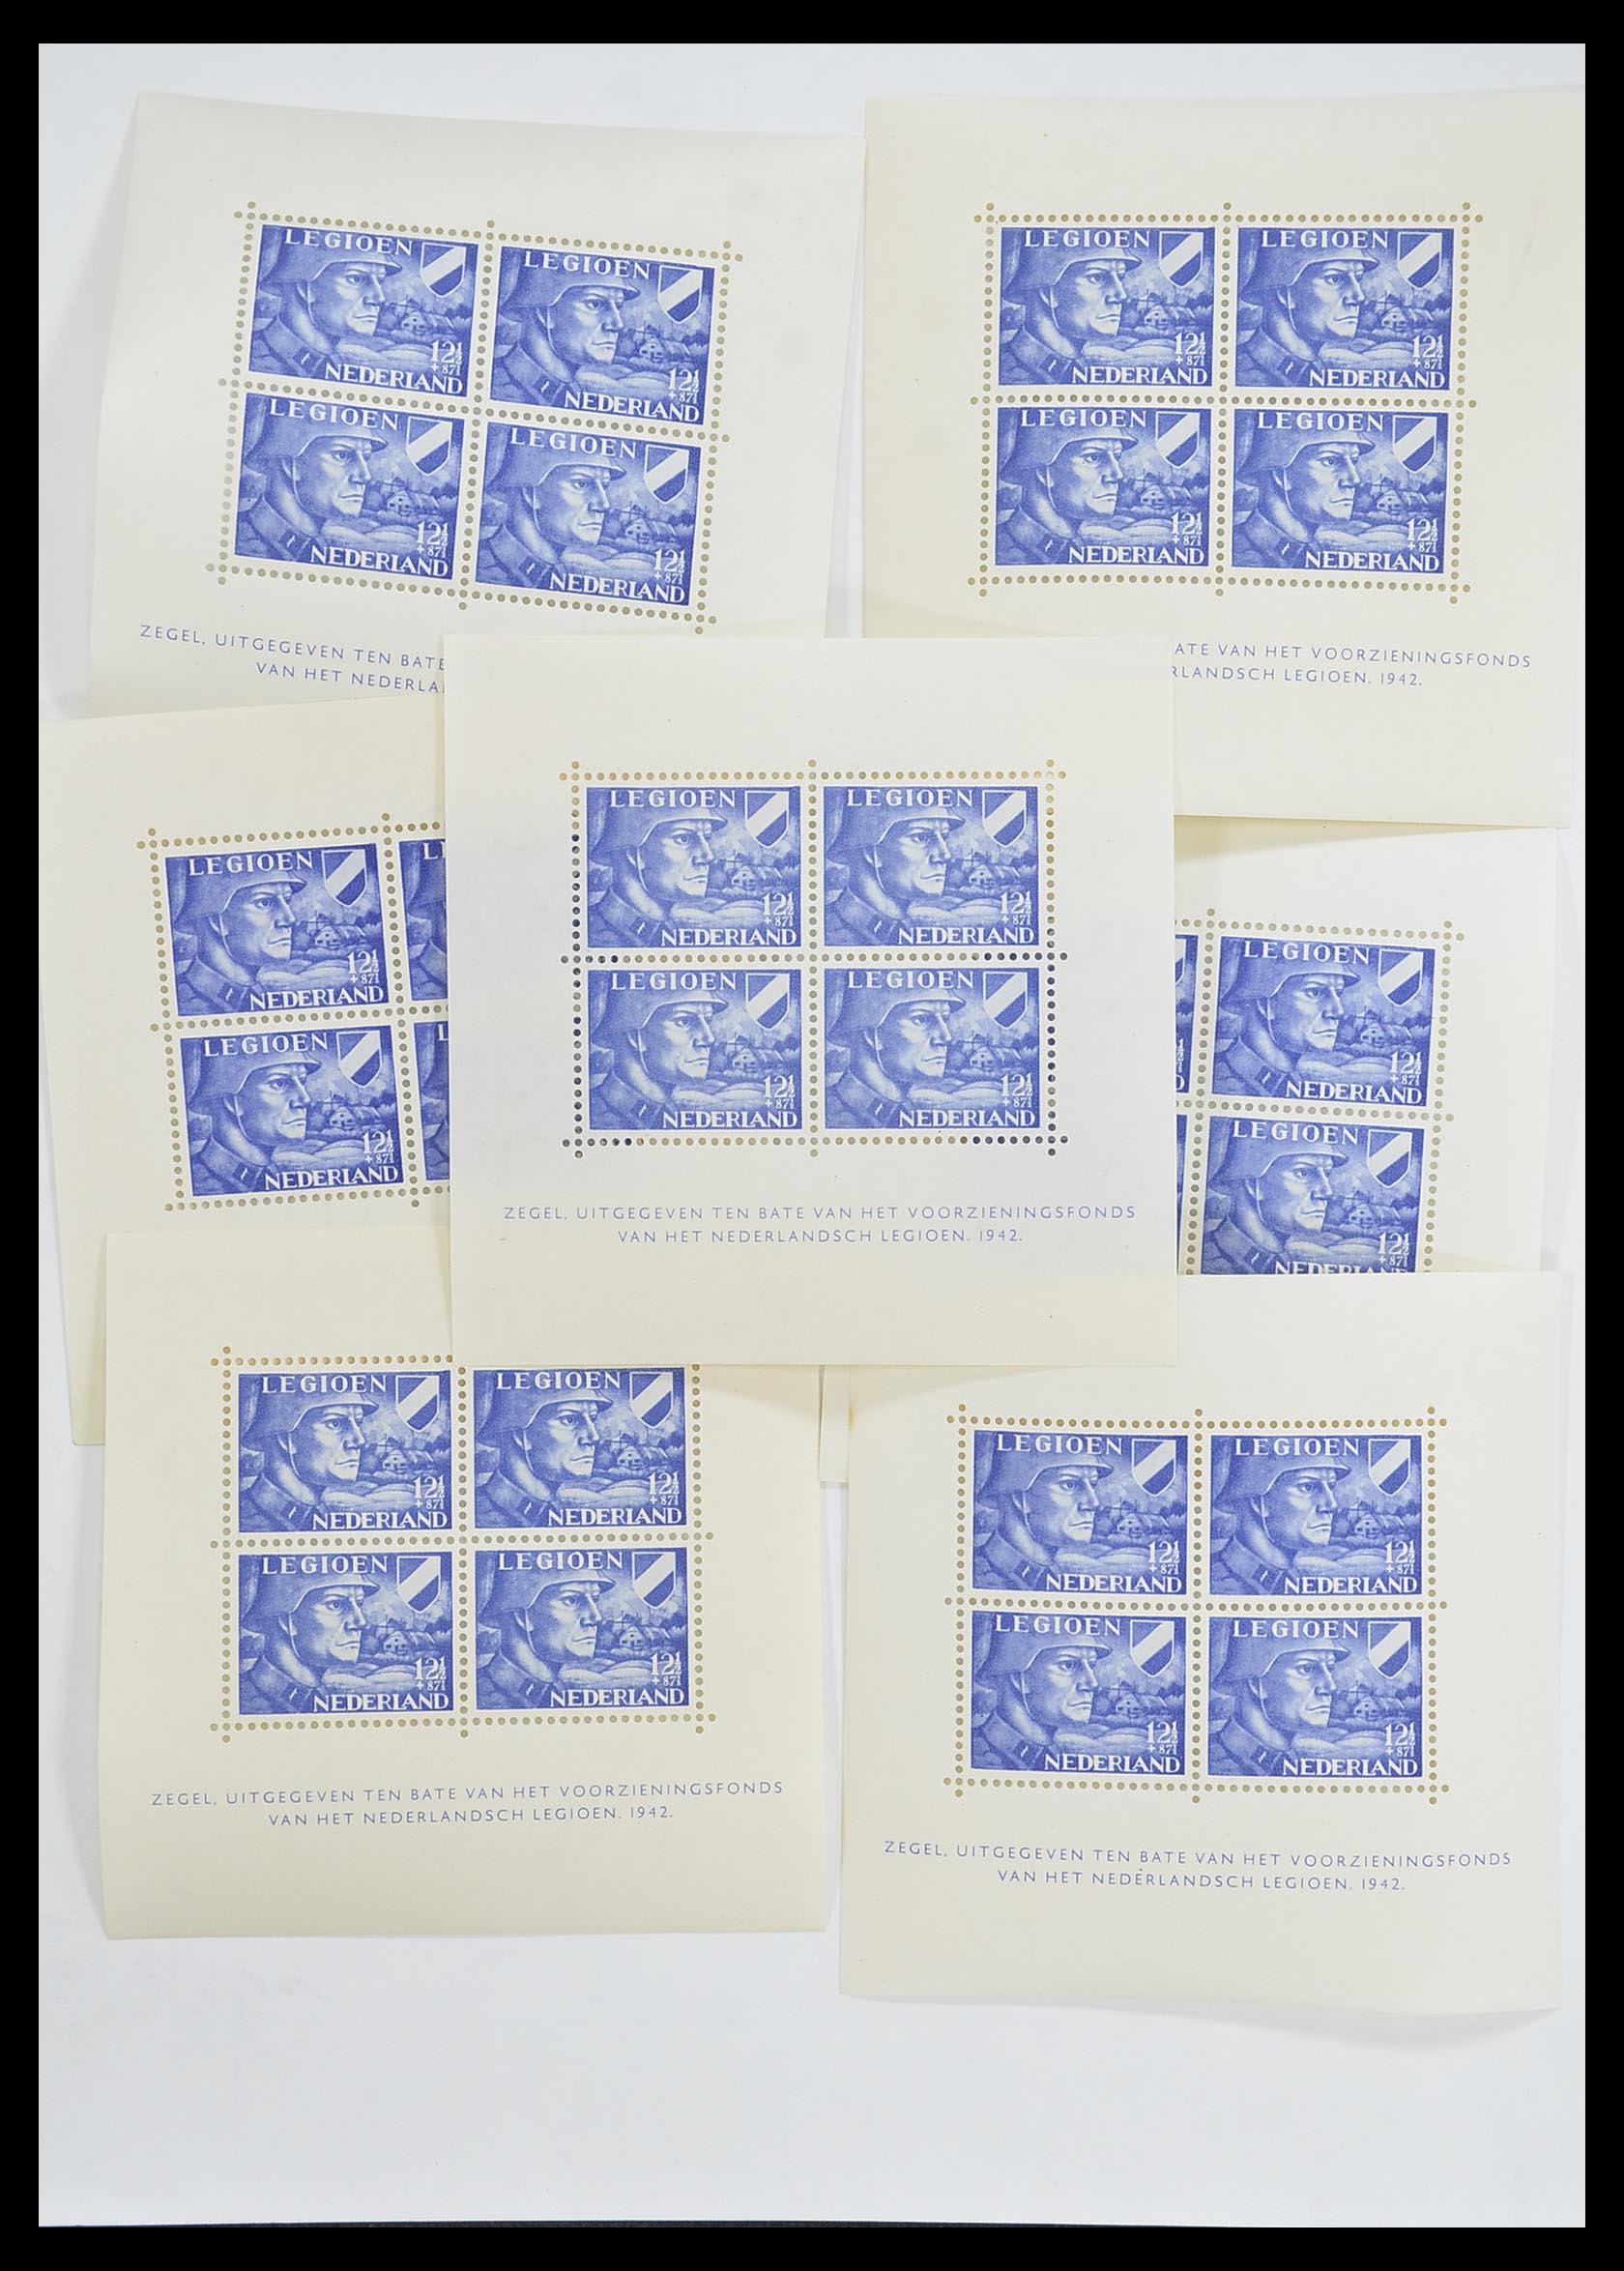 33940 427 - Stamp collection 33940 Netherlands and Dutch territories 1852-1965.